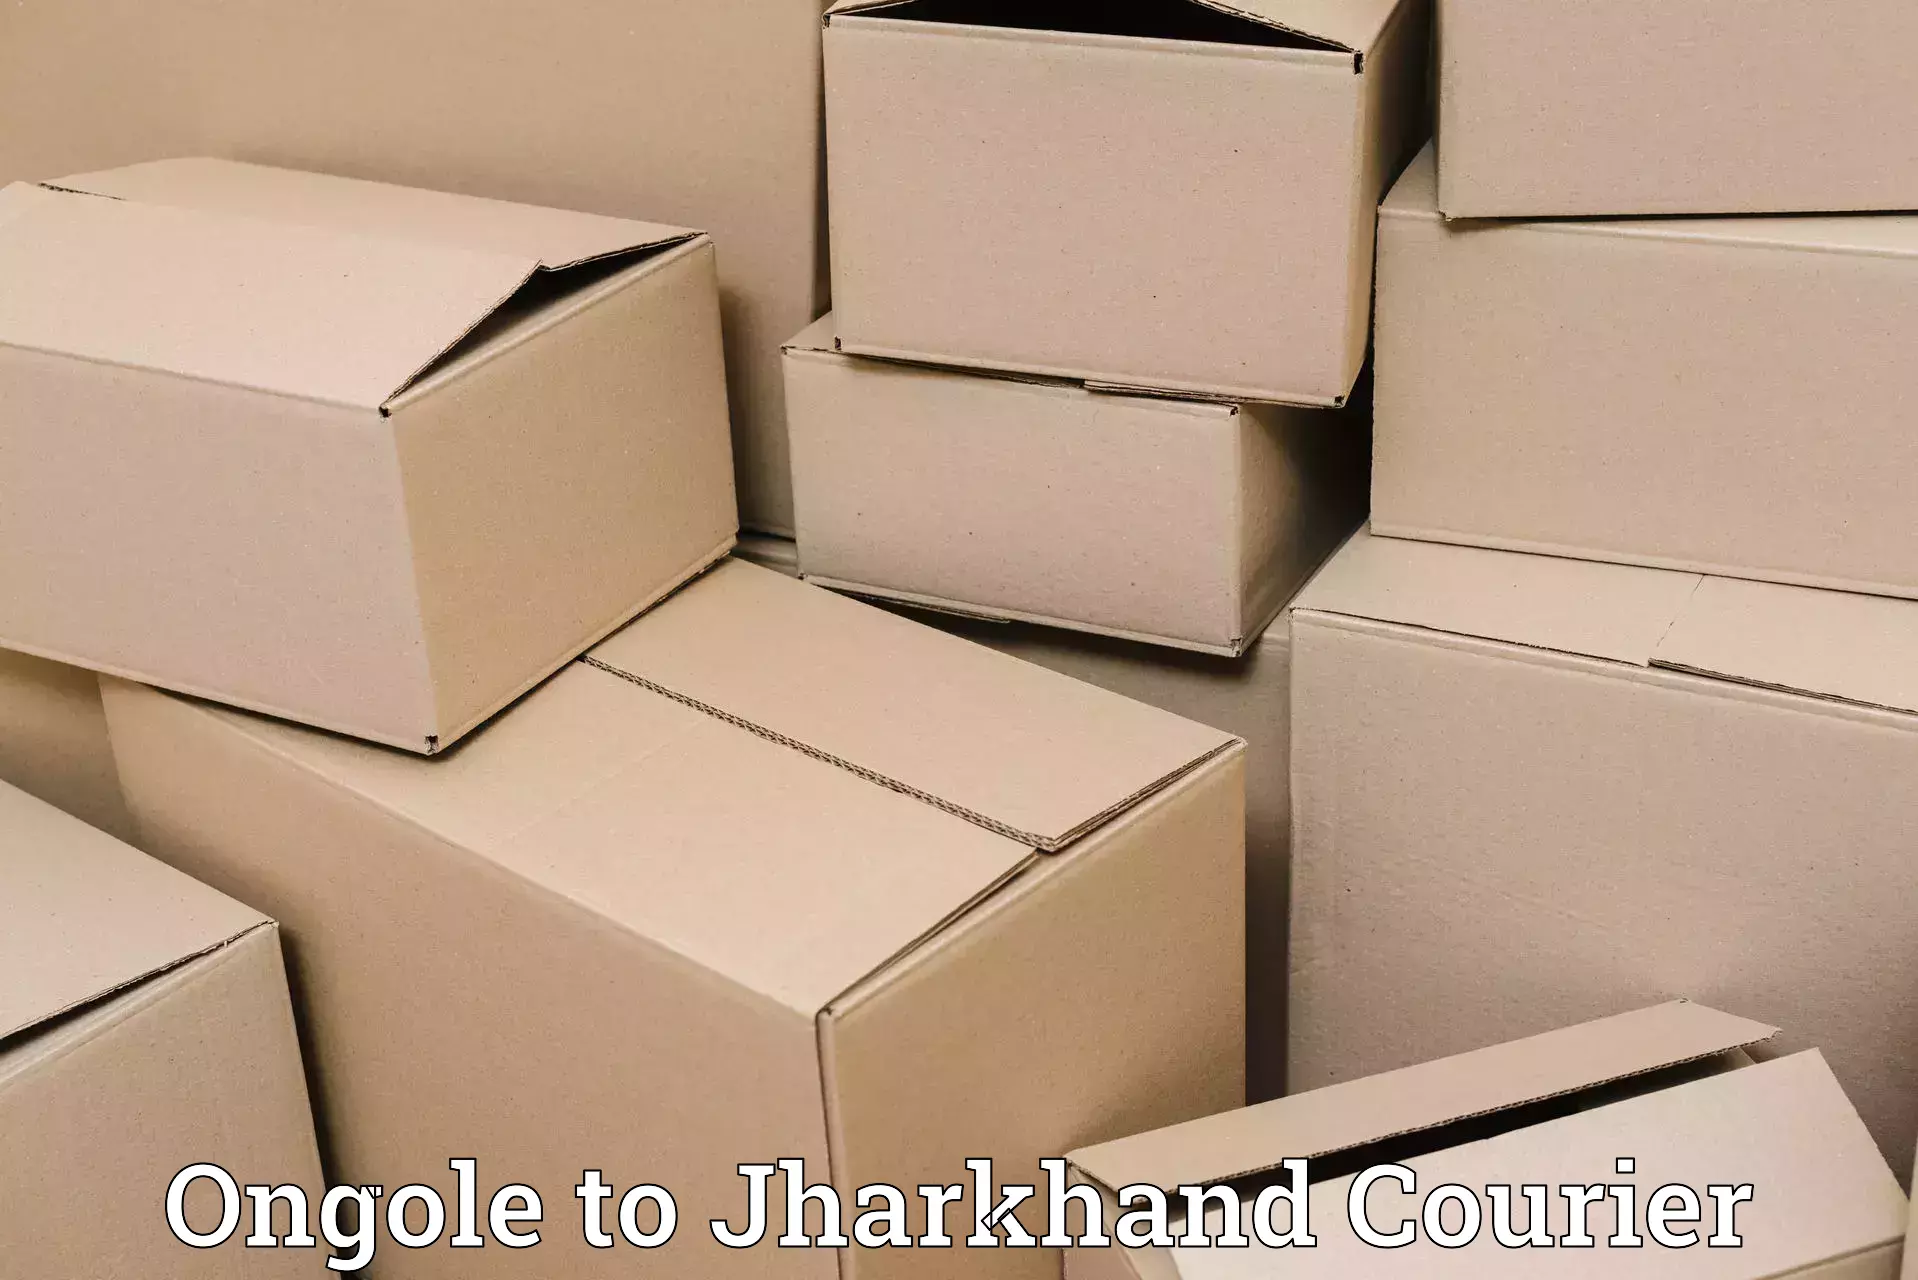 Scheduled delivery in Ongole to Shikaripara